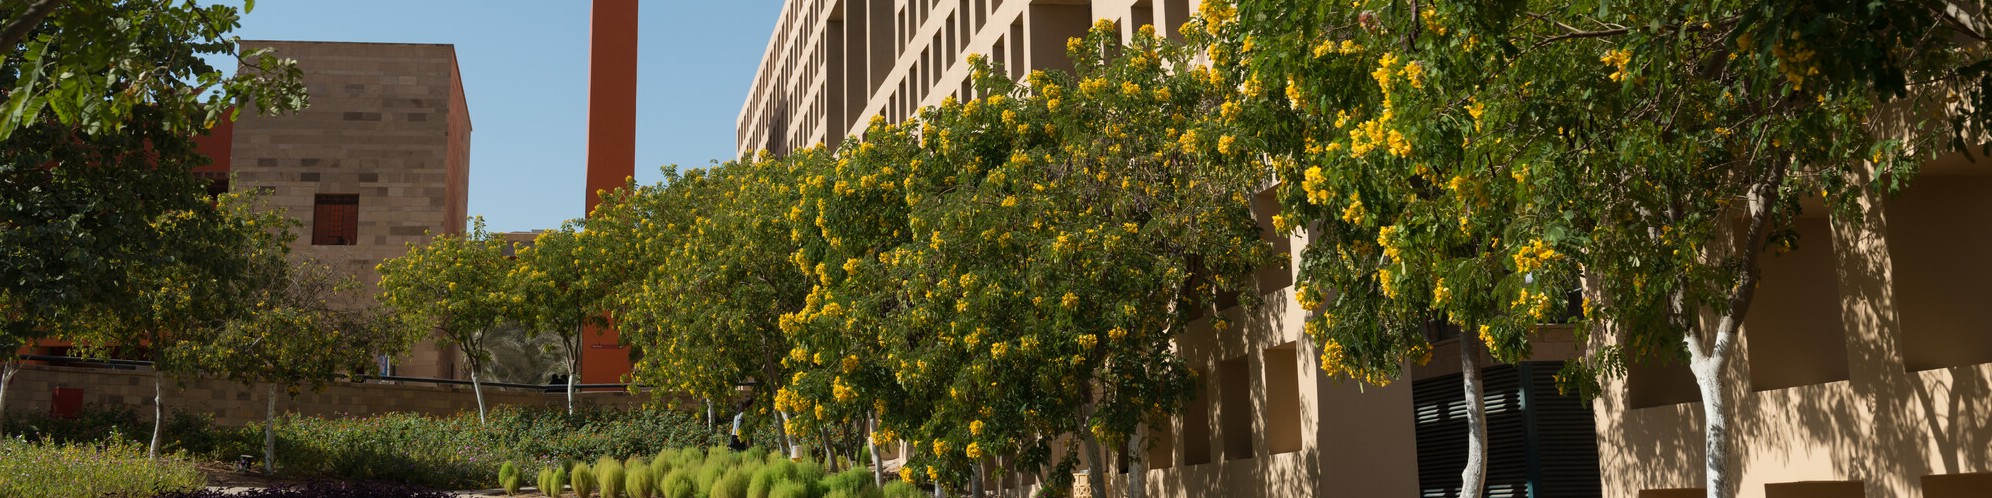 AUC Library building with trees and yellow flowers